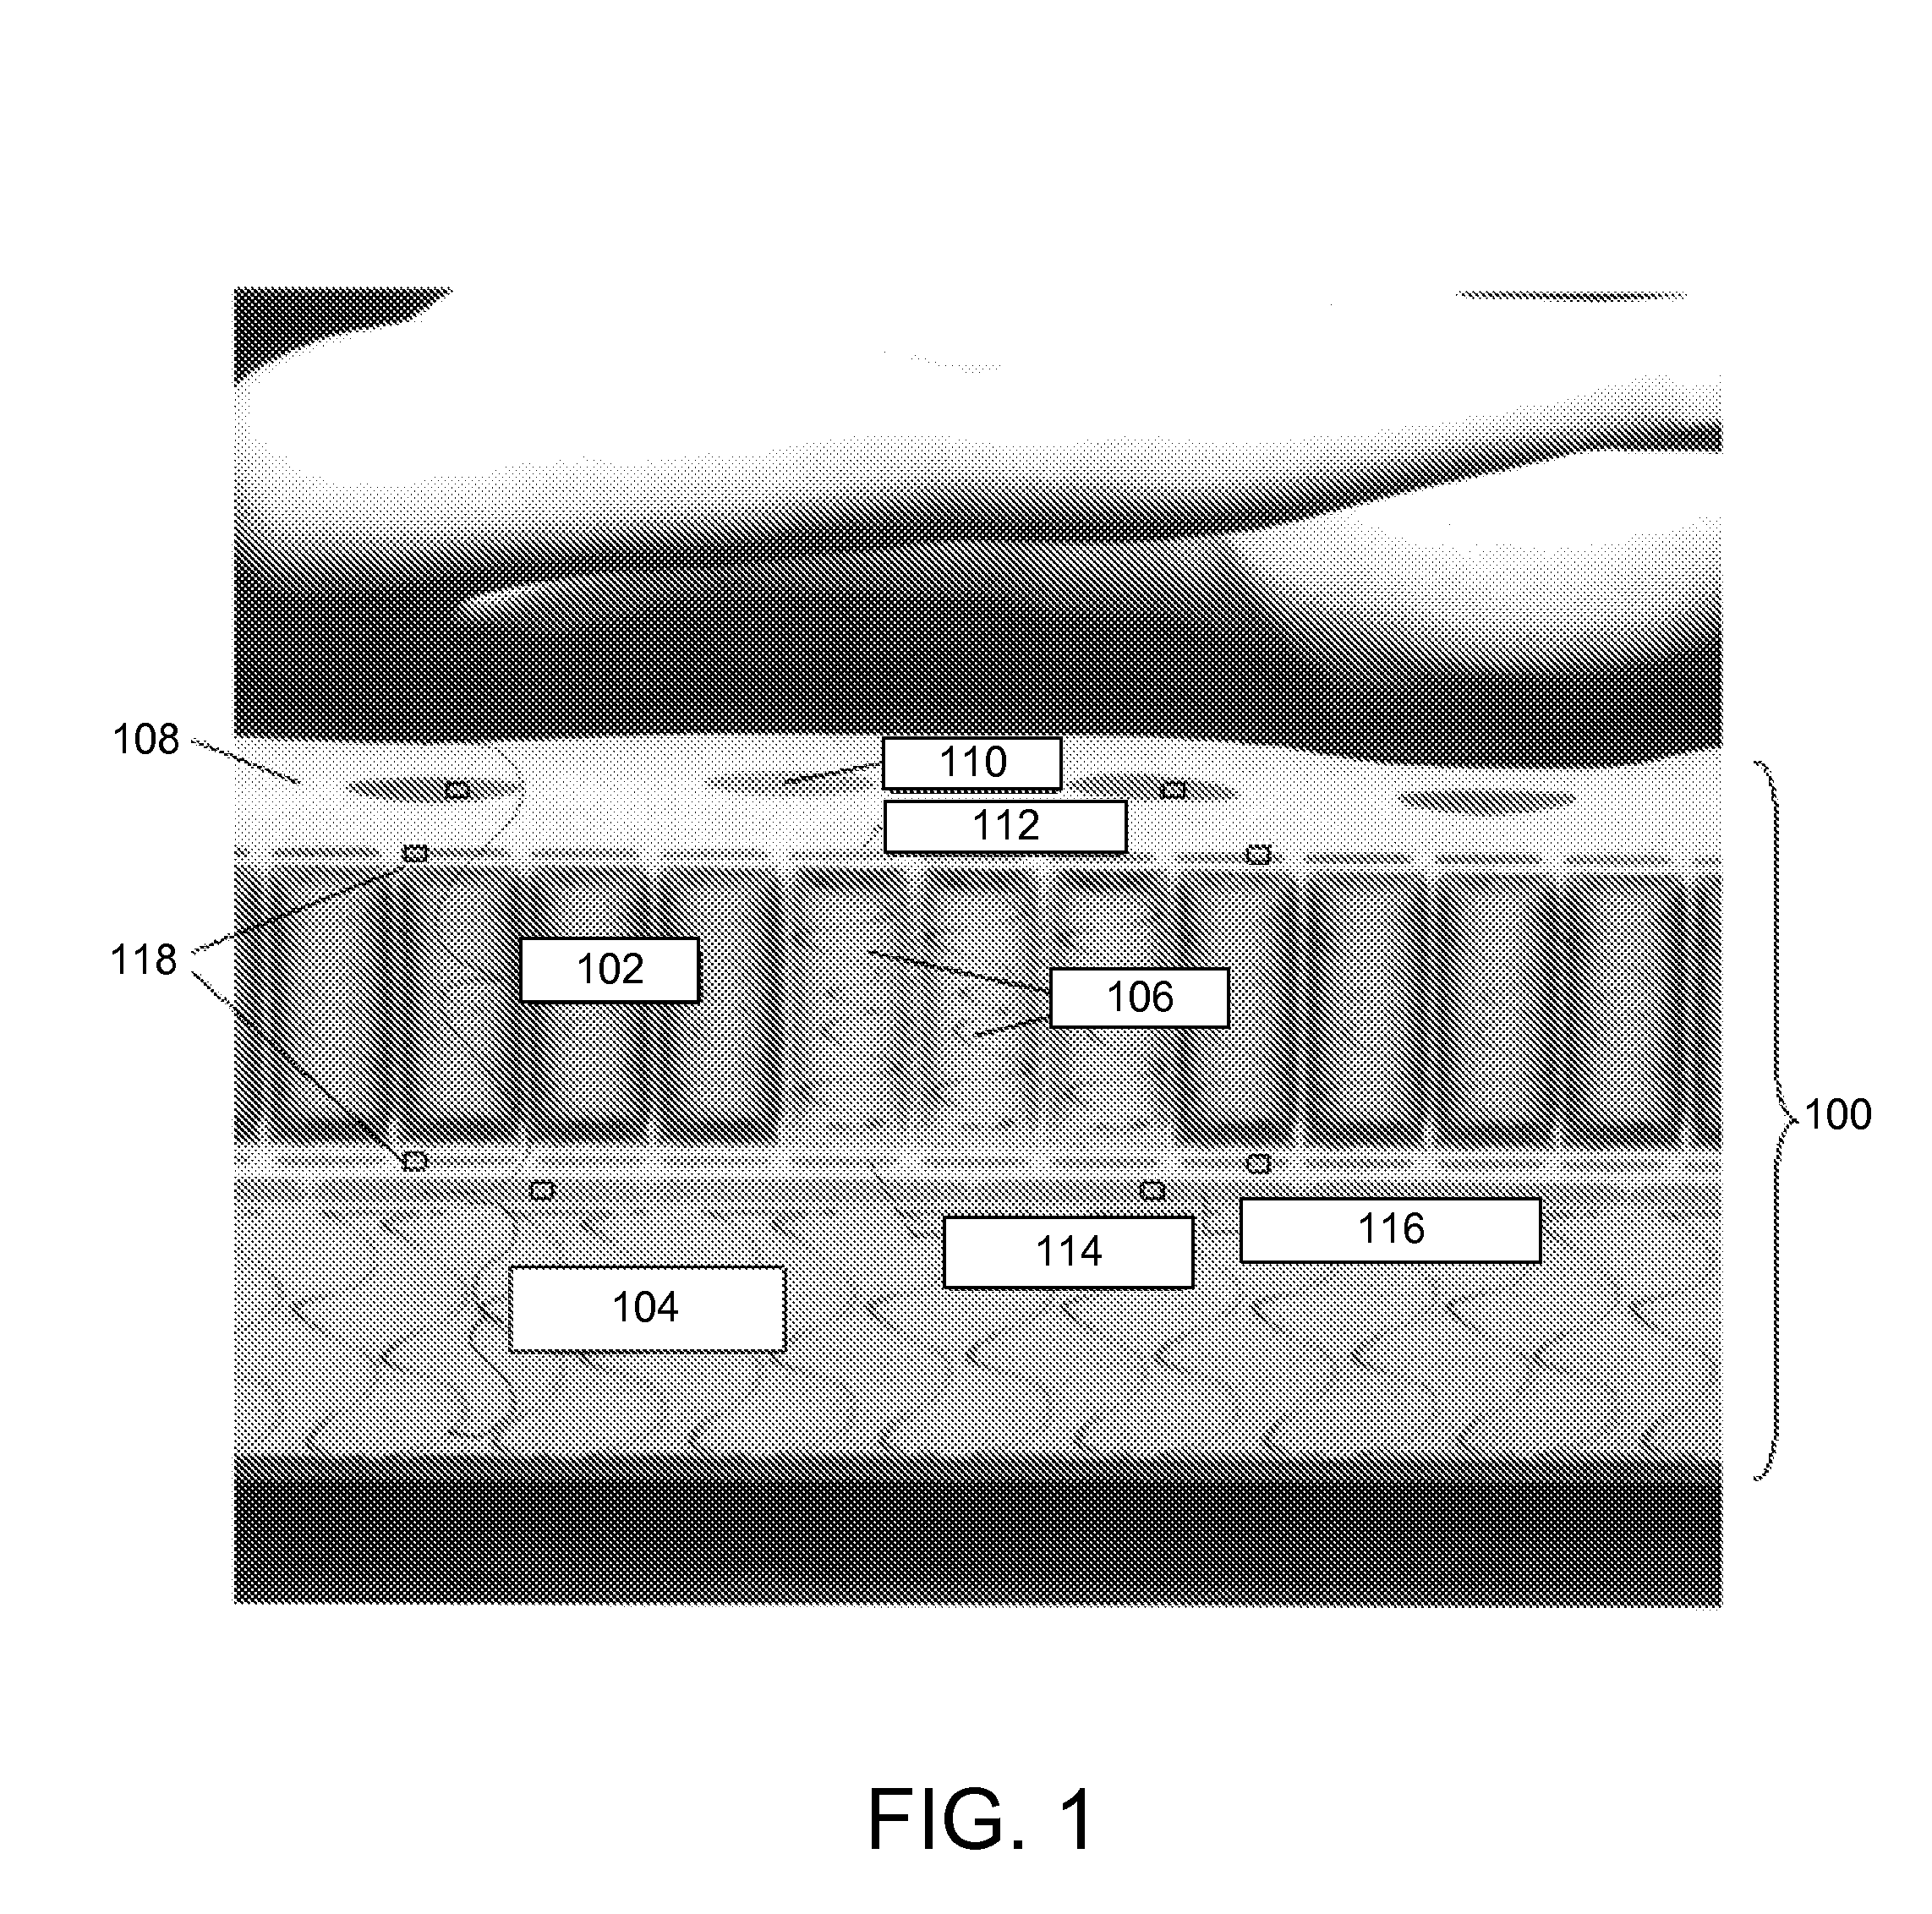 System and Method for Recommending a Bedding Product